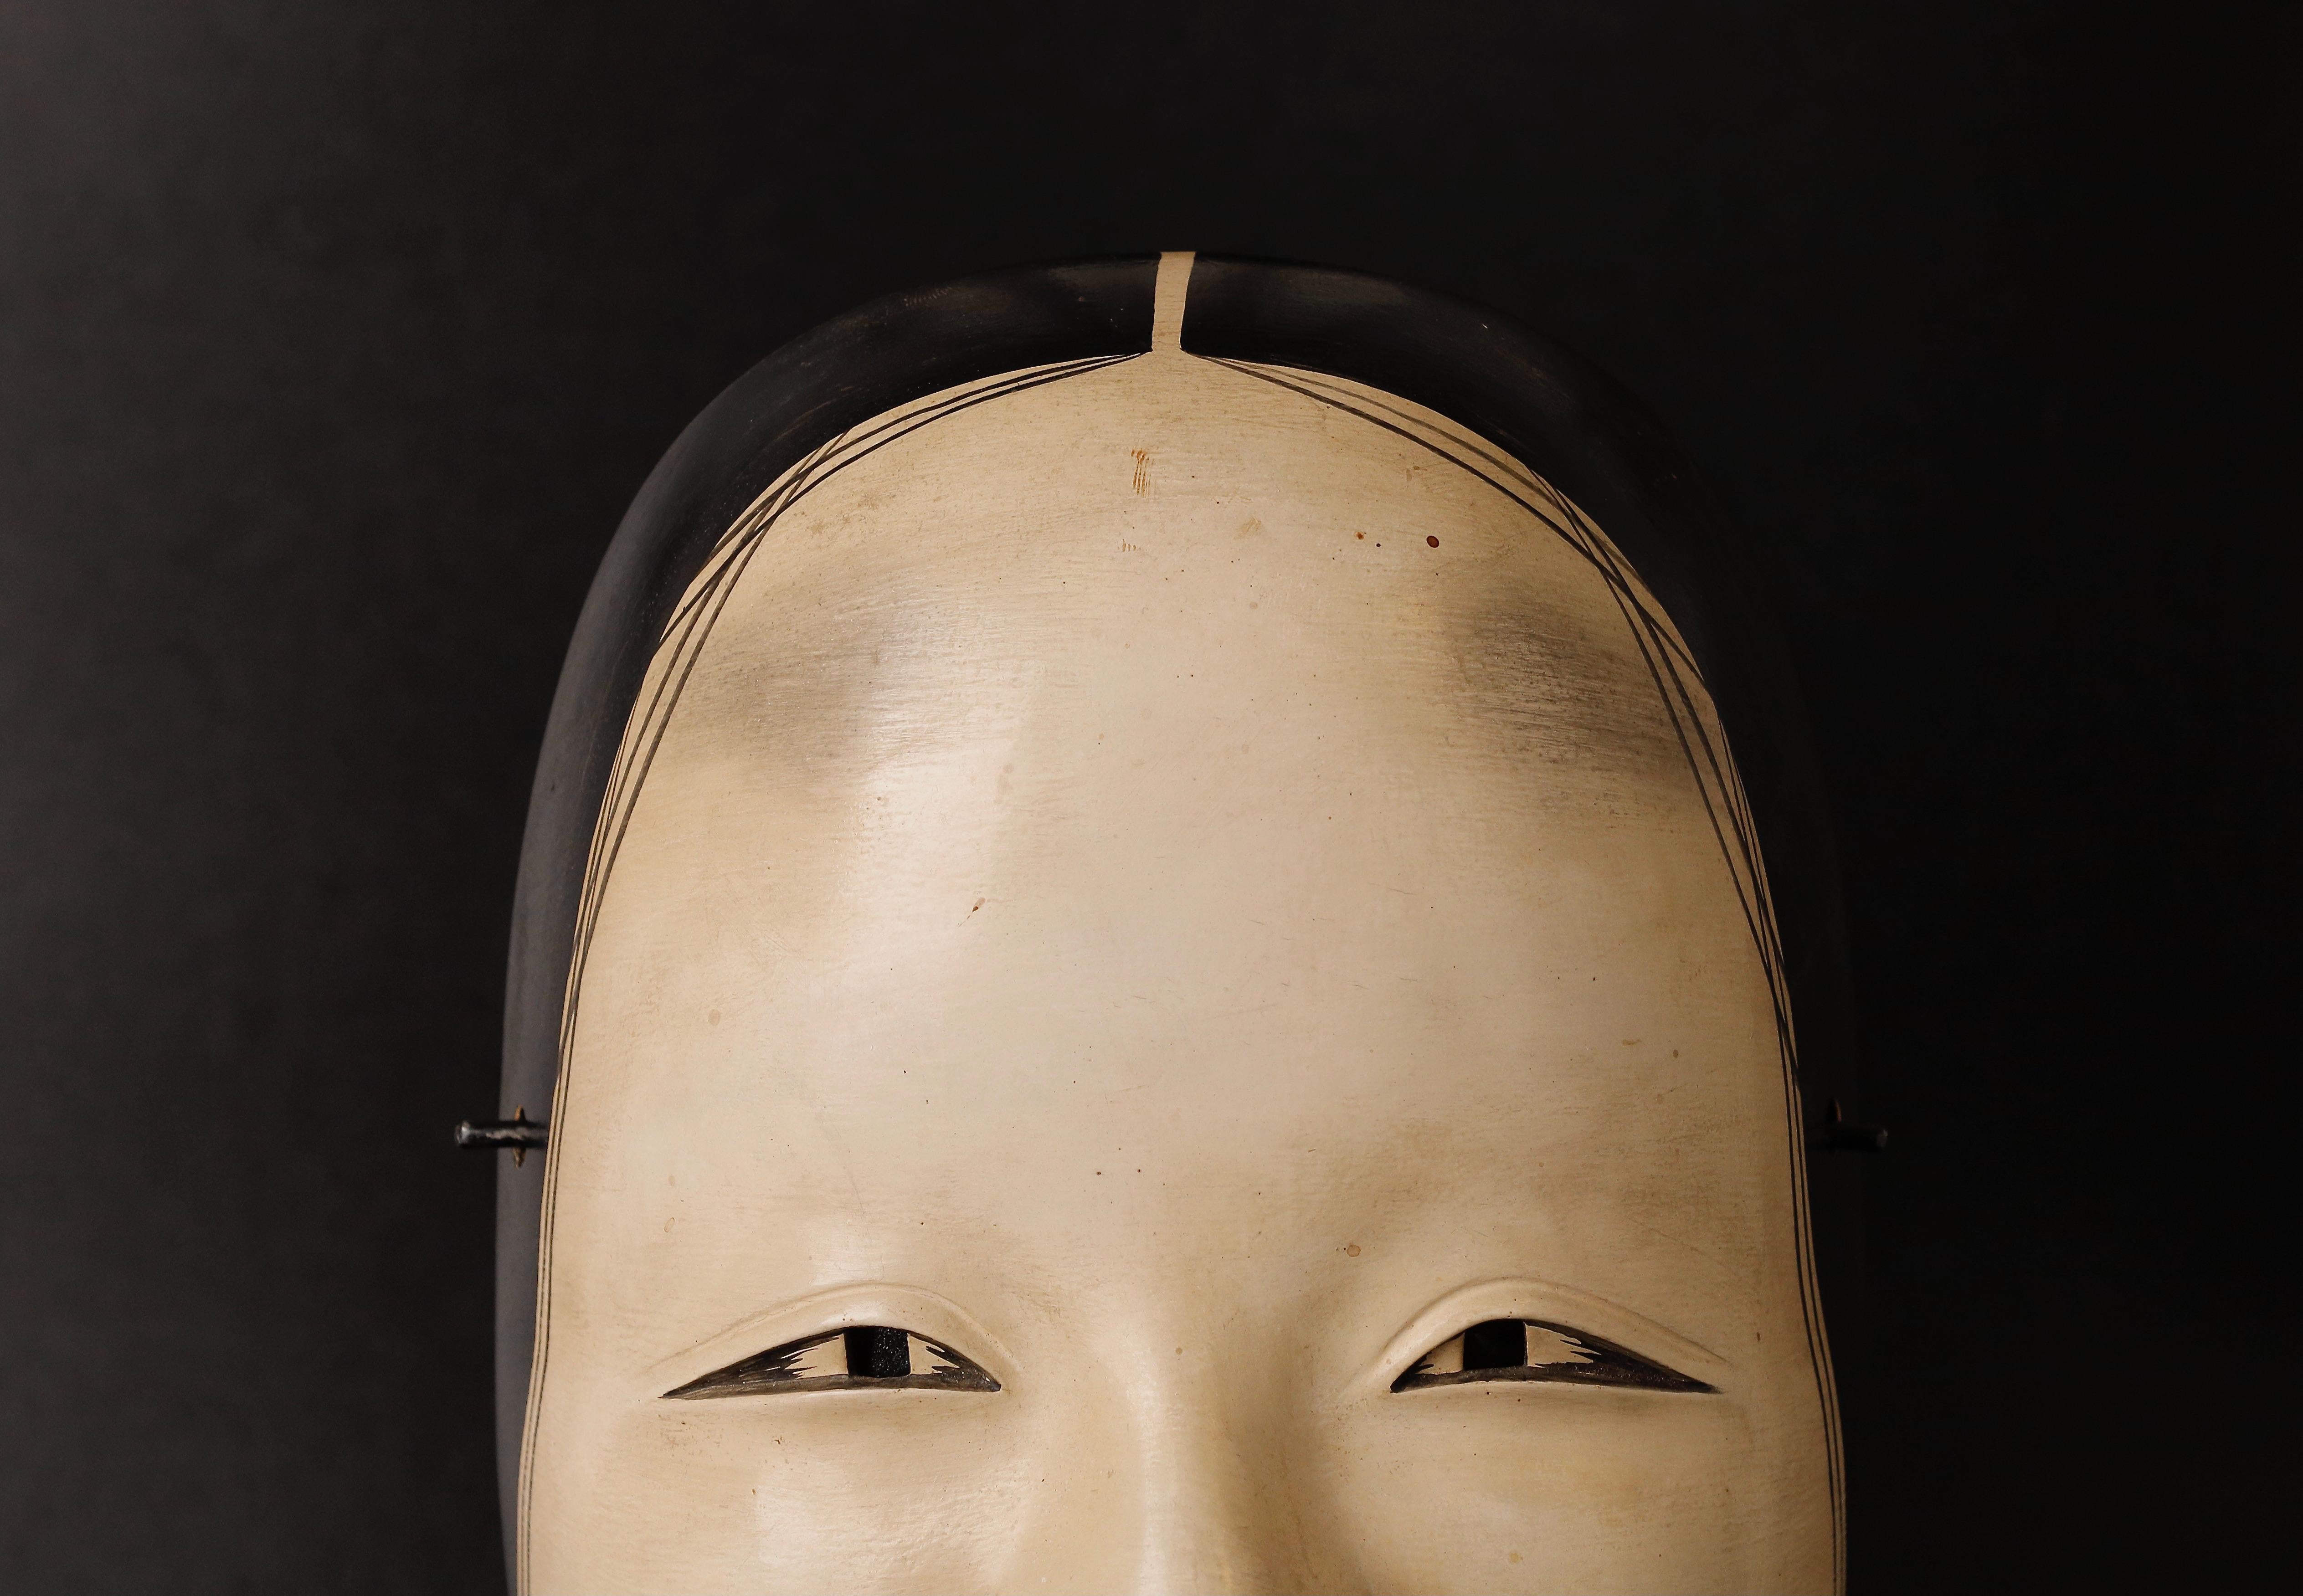 Japanese Noh Mask was crafted at early Edo period. The Japanese Noh Mask depicting Zou-onna that you are considering is an excellent example of a mask that would be used in a Noh play. The mask represents a female deity or woman of high rank, and